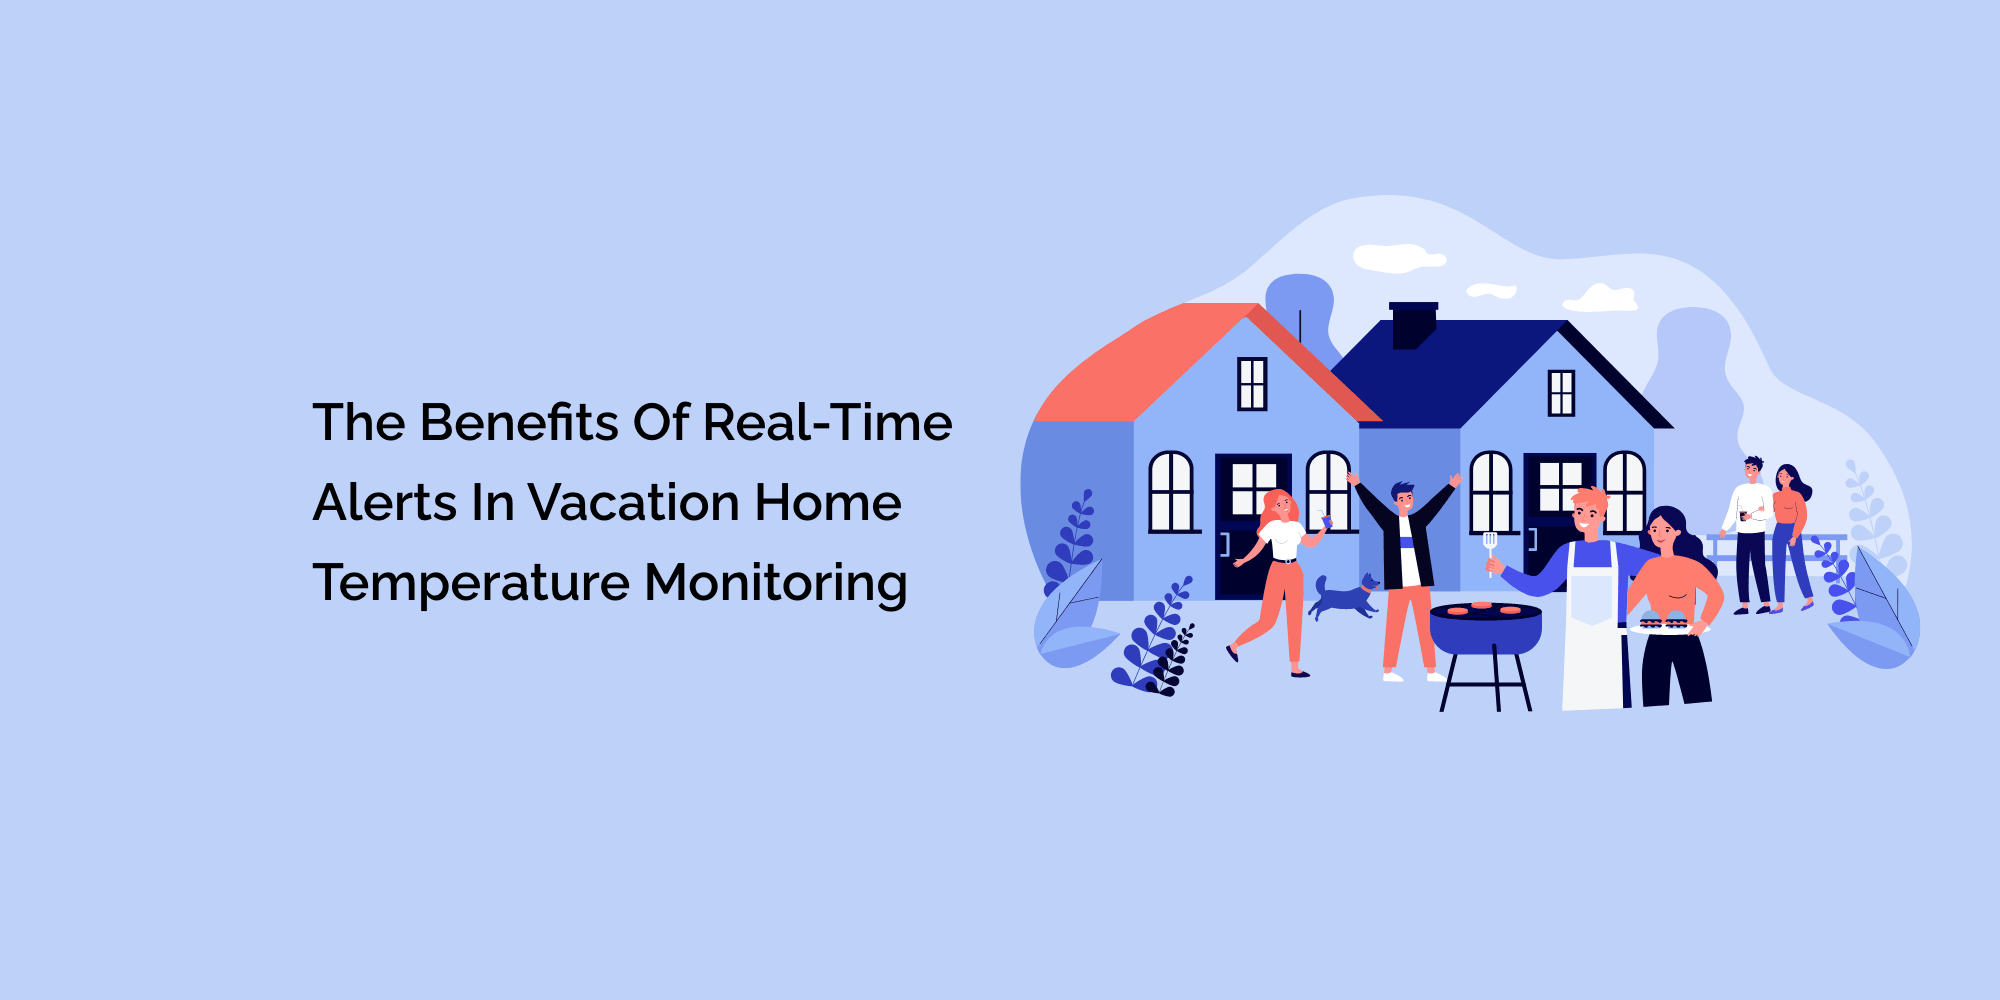 The Benefits of Real-Time Alerts in Vacation Home Temperature Monitoring